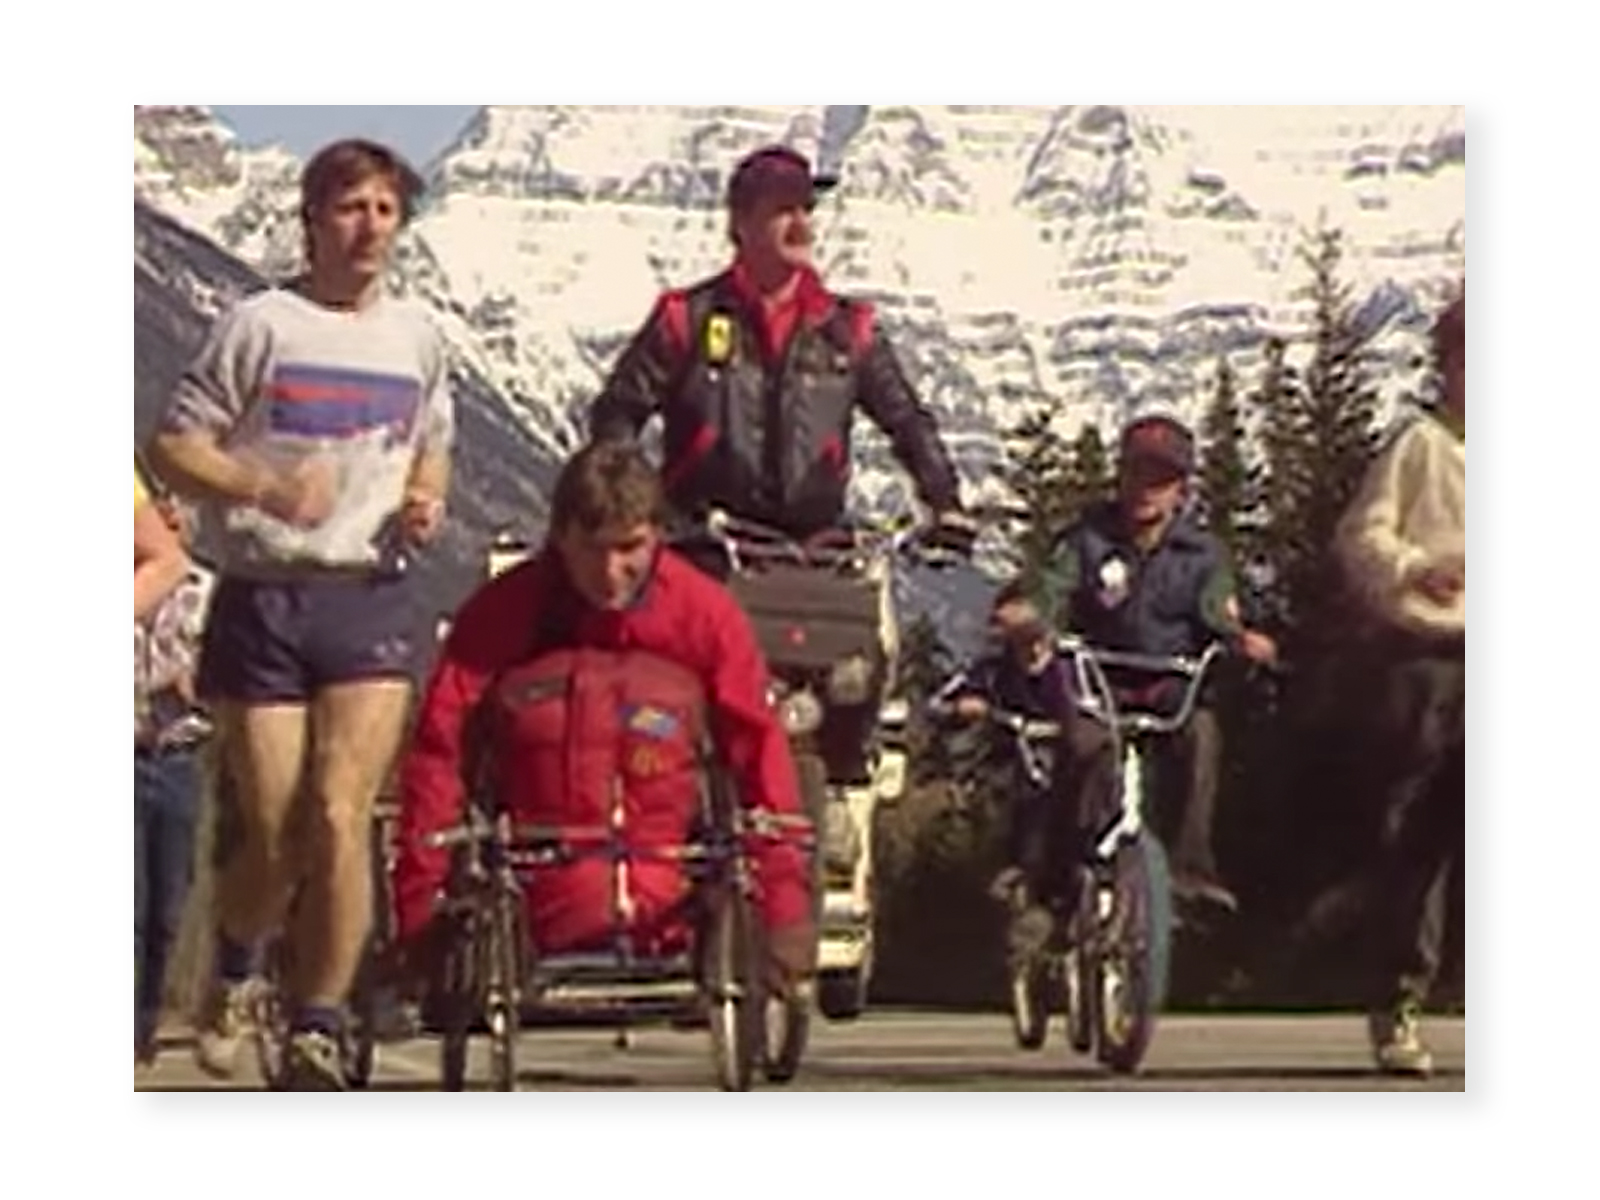 Screenshot from "The Journey" video - an image from the Man In Motion World Tour, where Rick is wheeling wearing a red snow suit. Beside him are a few runners as well as cyclists. In the background is a mountain with snow and evergreen trees.